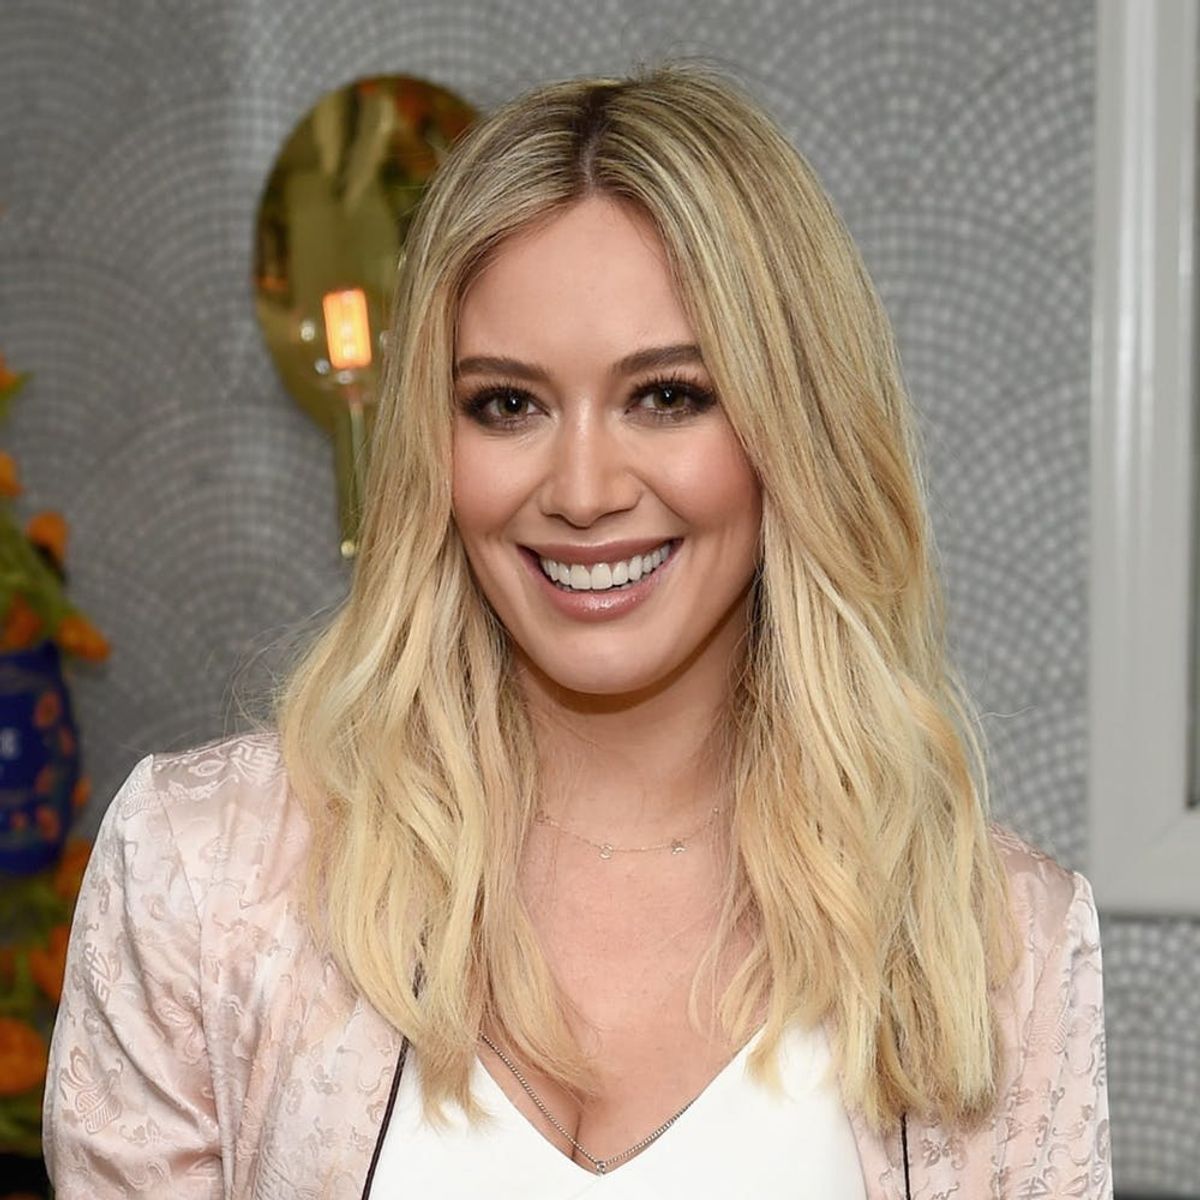 Hilary Duff Looks Like the Dancing Lady Emoji in This Killer Red Dress